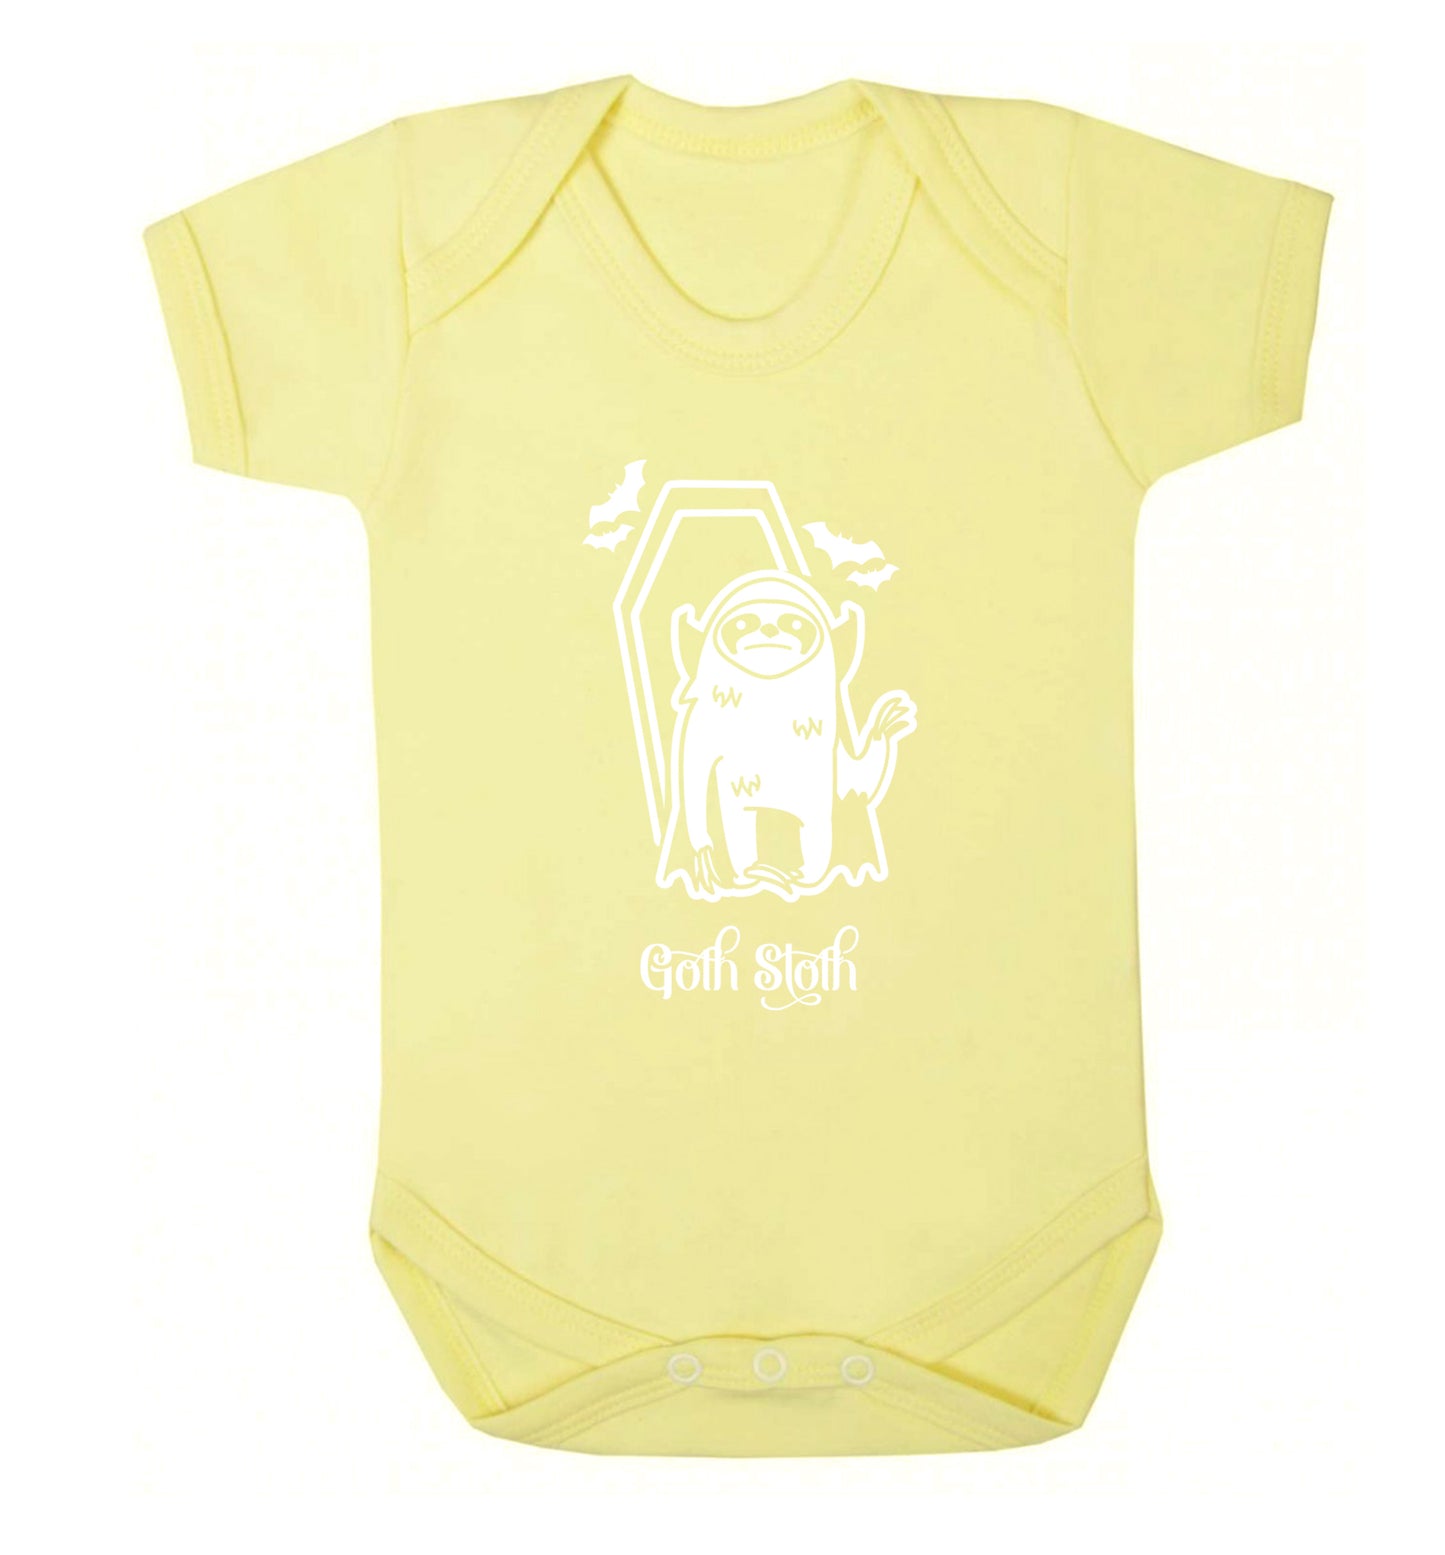 Goth Sloth Baby Vest pale yellow 18-24 months